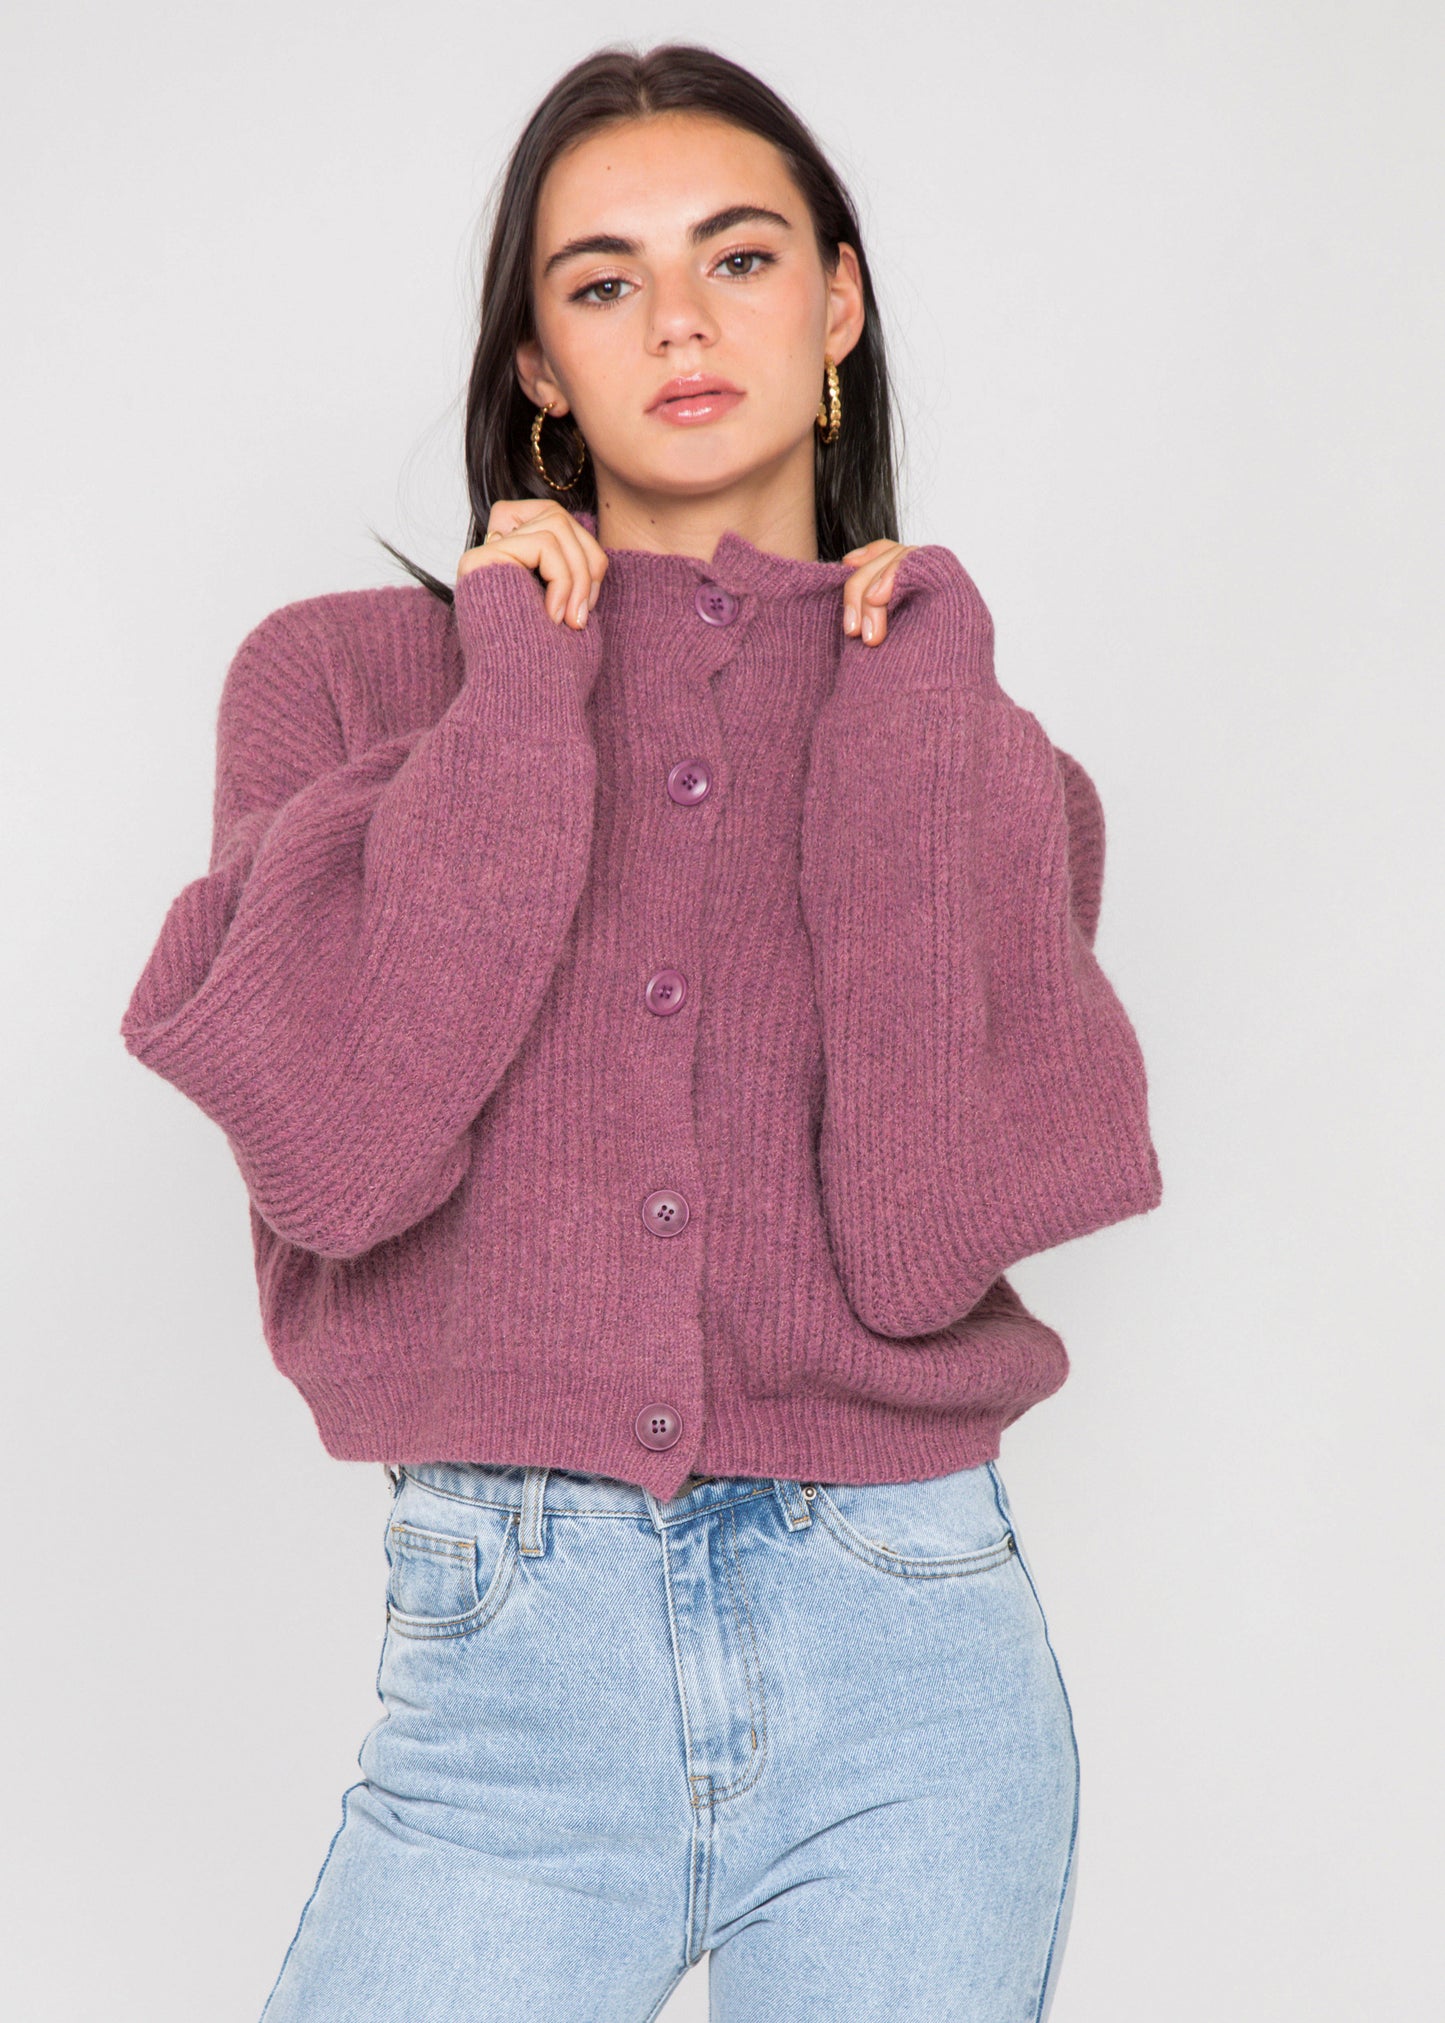 High neck knitted cardigan with buttons in plum